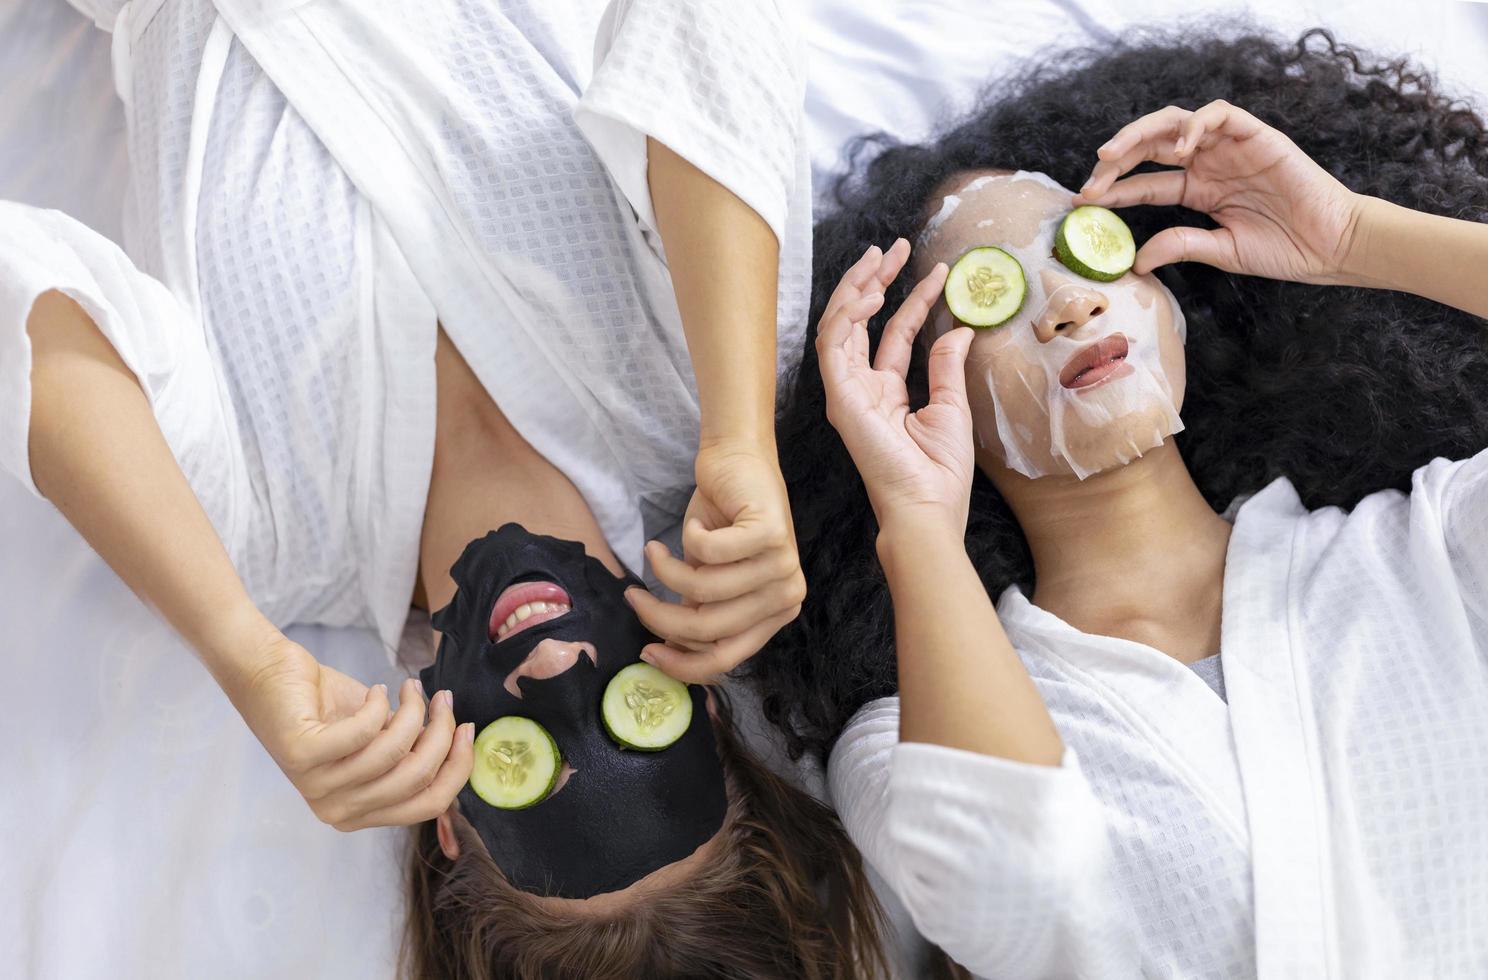 Couple of girlfriend in bathrobe doing skincare routine using facial mask and cucumber slice on spa holiday for beauty skin and treatment concept photo